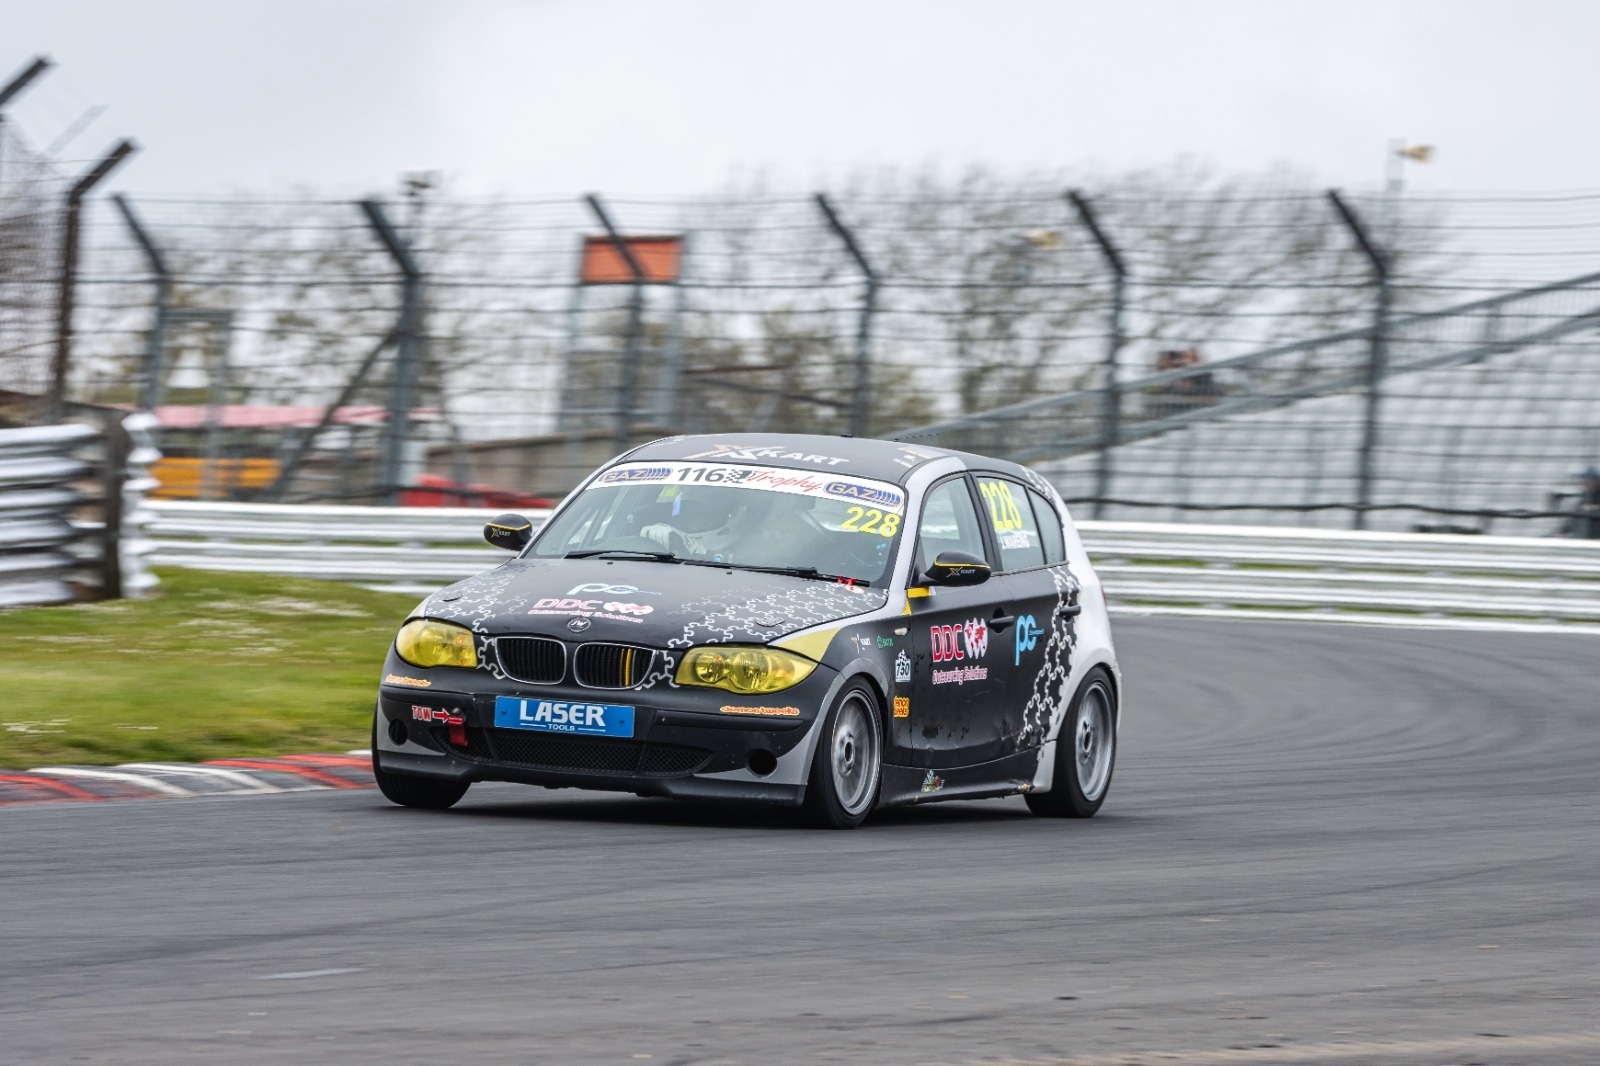 bmw 116 trophy of james wareing on race circuit with metal fencing in background grass and red and white curbing on apex